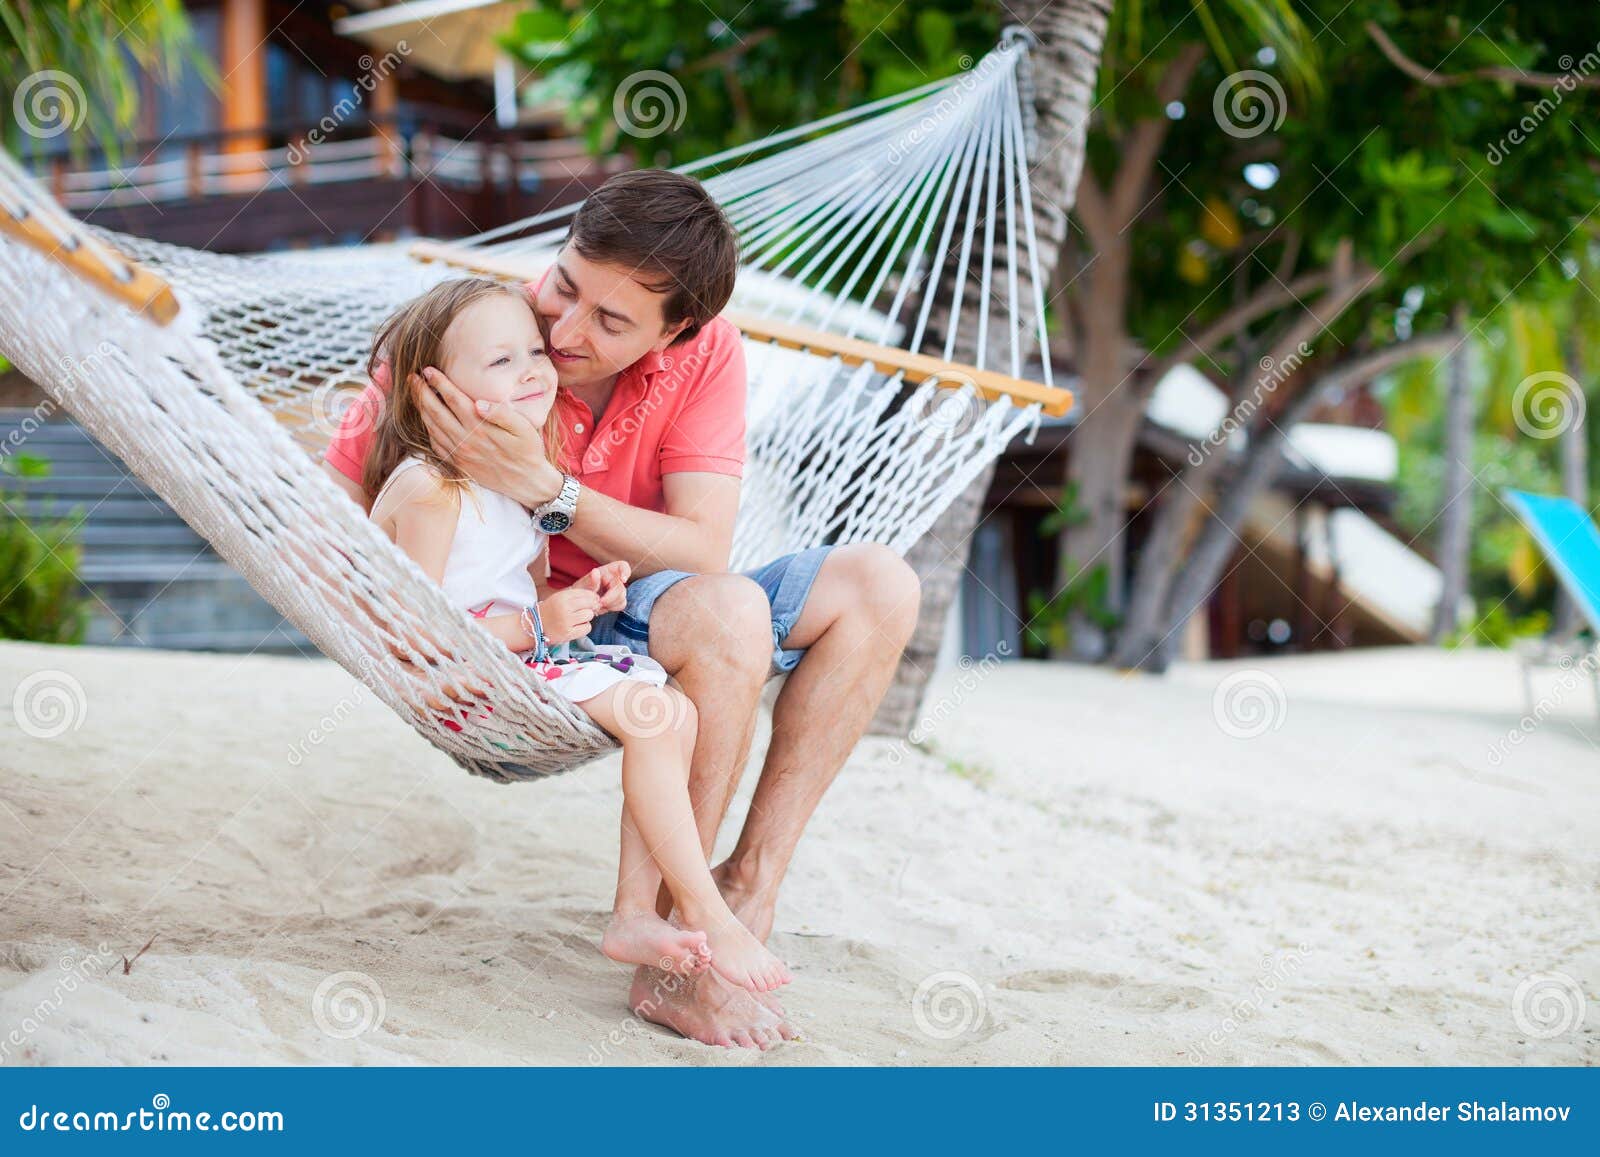 Daddy And Daughter On Vacation Royalty Free Stock Images 